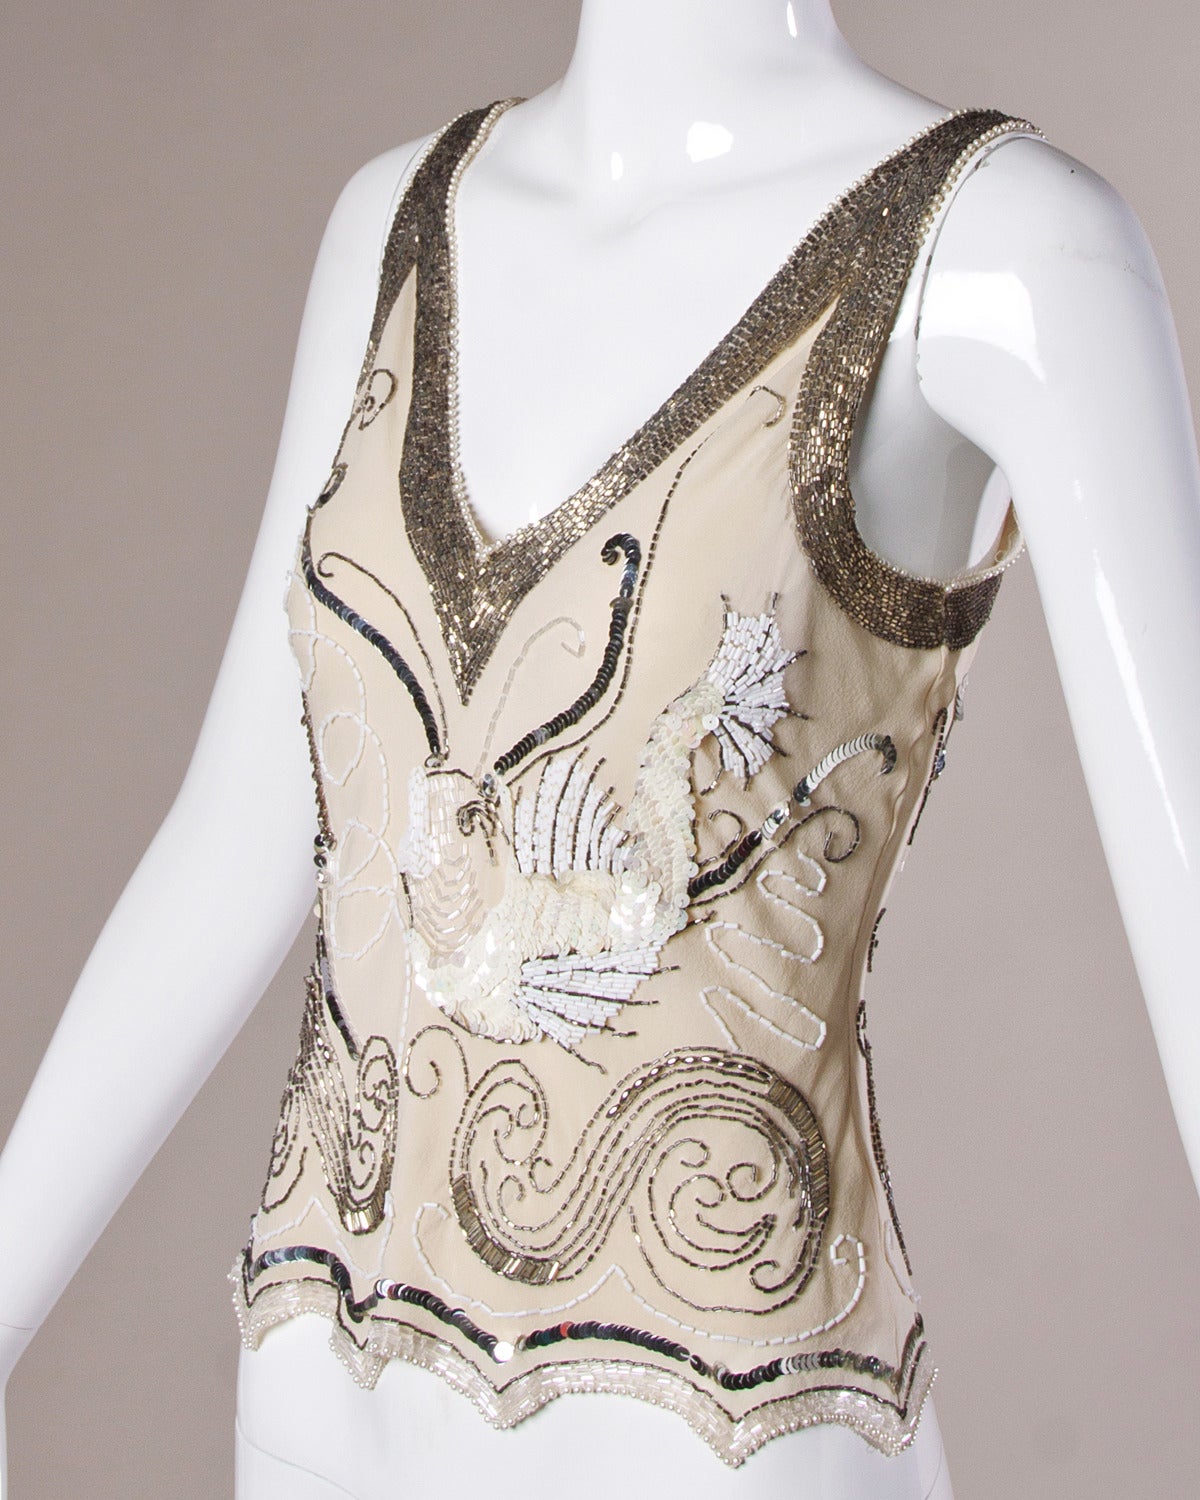 Gorgeous 1920's-inspired ivory silk sleeveless top with elaborate hand beading and sequin design by Fabrice.

Details:

Fully Lined
No Closure/ Fabric Contains Stretch
Marked Size: M
Estimated Size: Small-Medium
Color: Ivory/ Iridescent